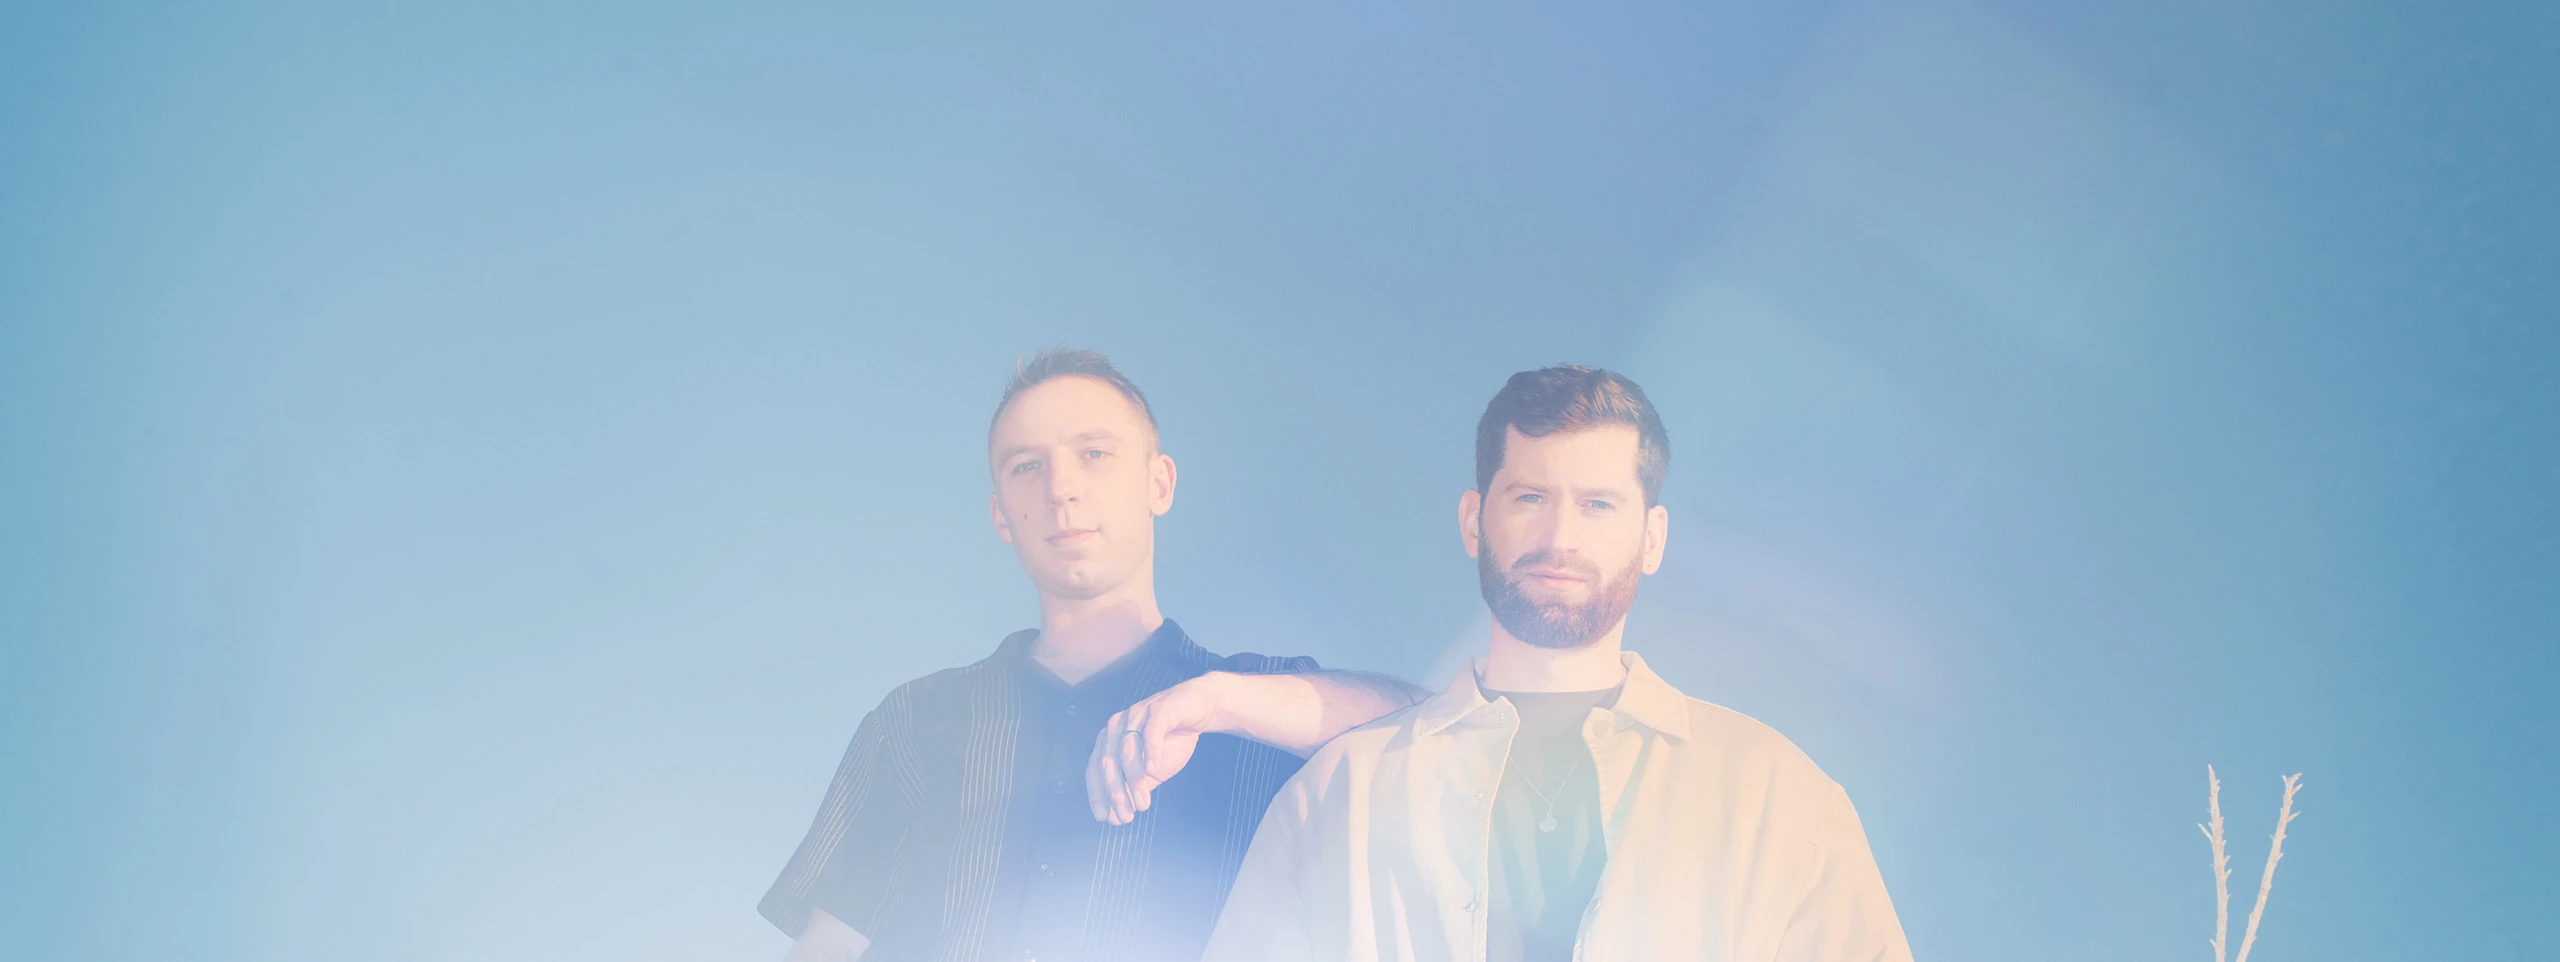 ODESZA ANNOUNCE RELEASE DATE OF NEW ALBUM, "The Last Goodbye"